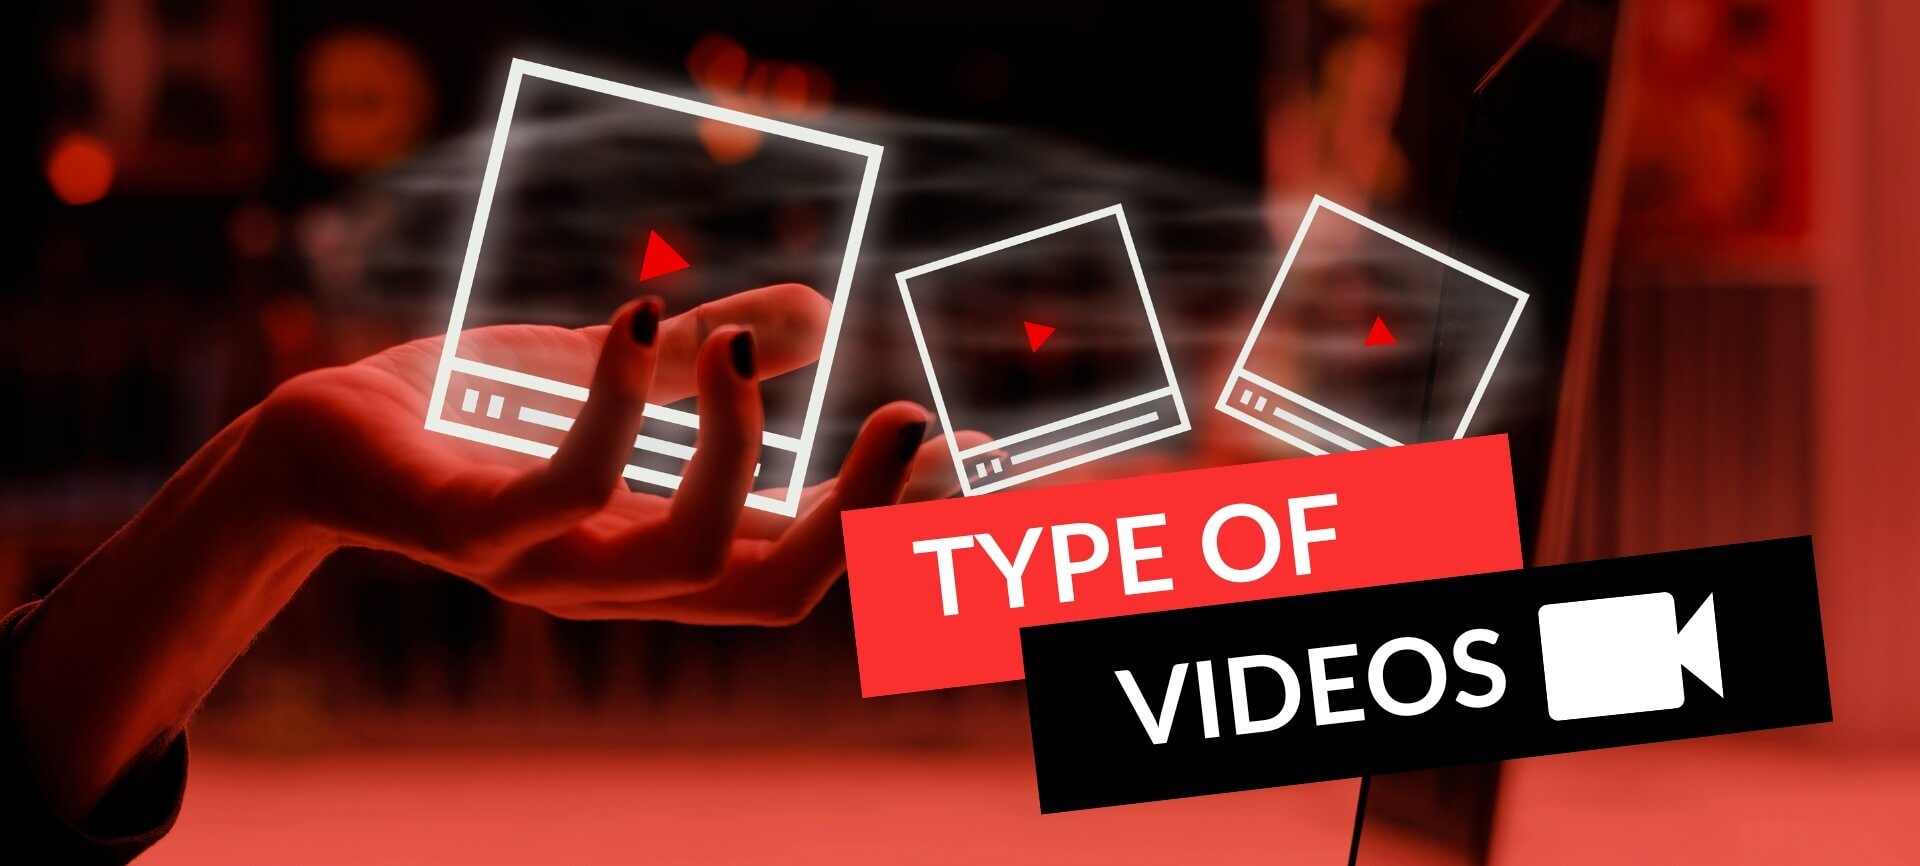 Type of Videos | How to make music video by Jass Bianchi